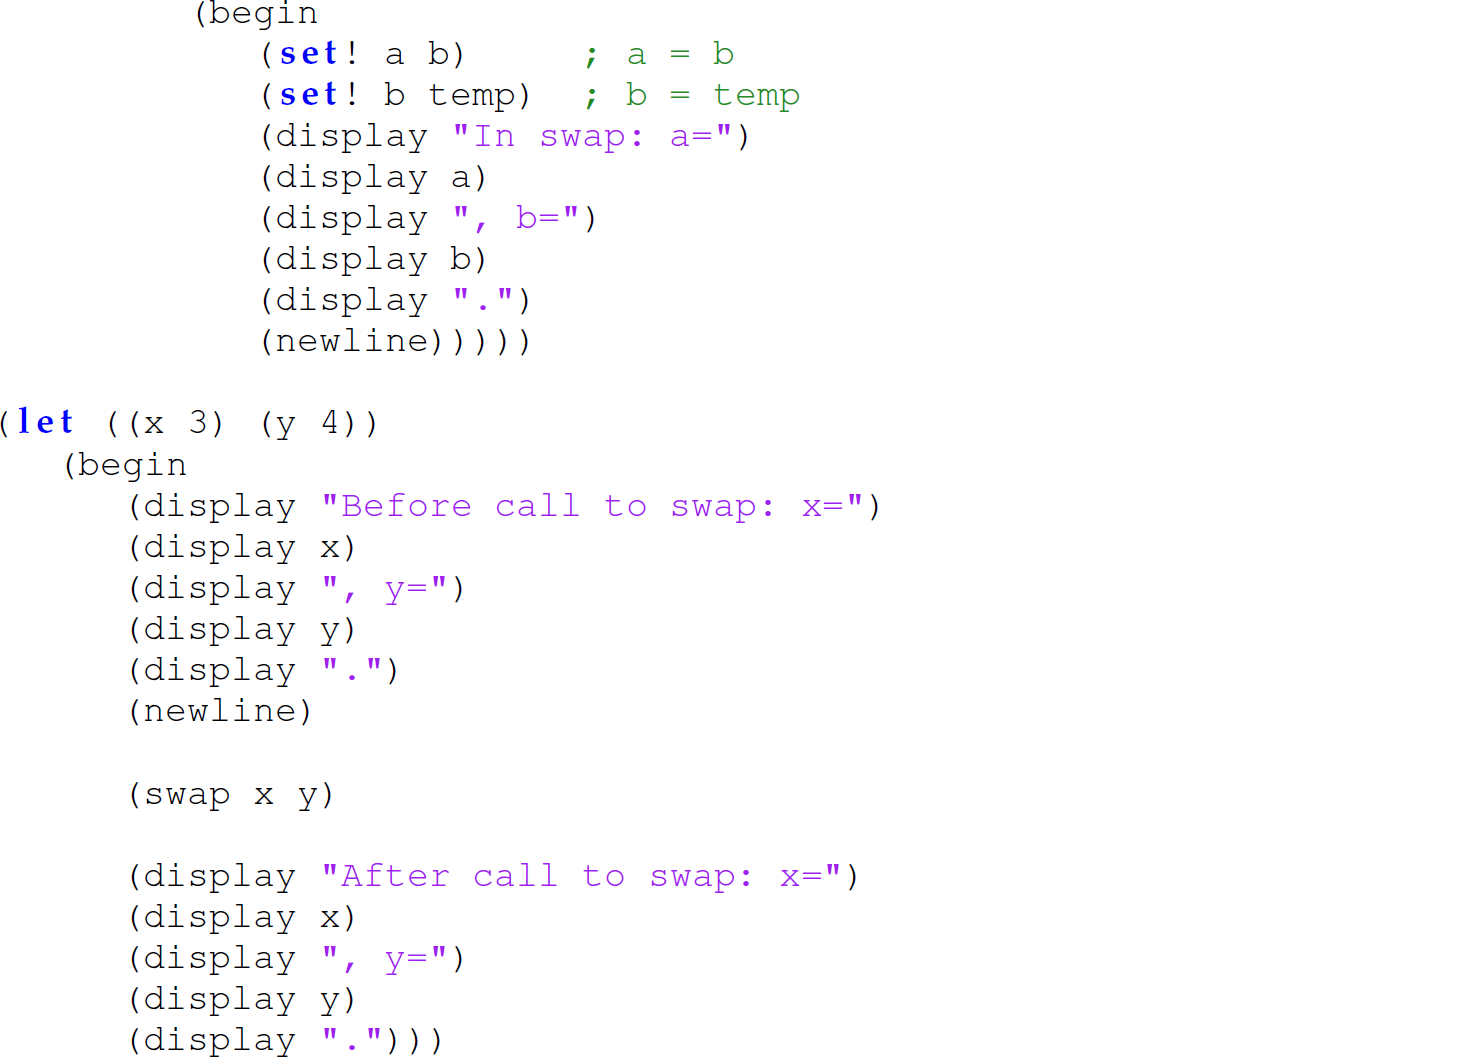 Continuation of the code in a Scheme program with the definition of swap, consisting of 23 lines.